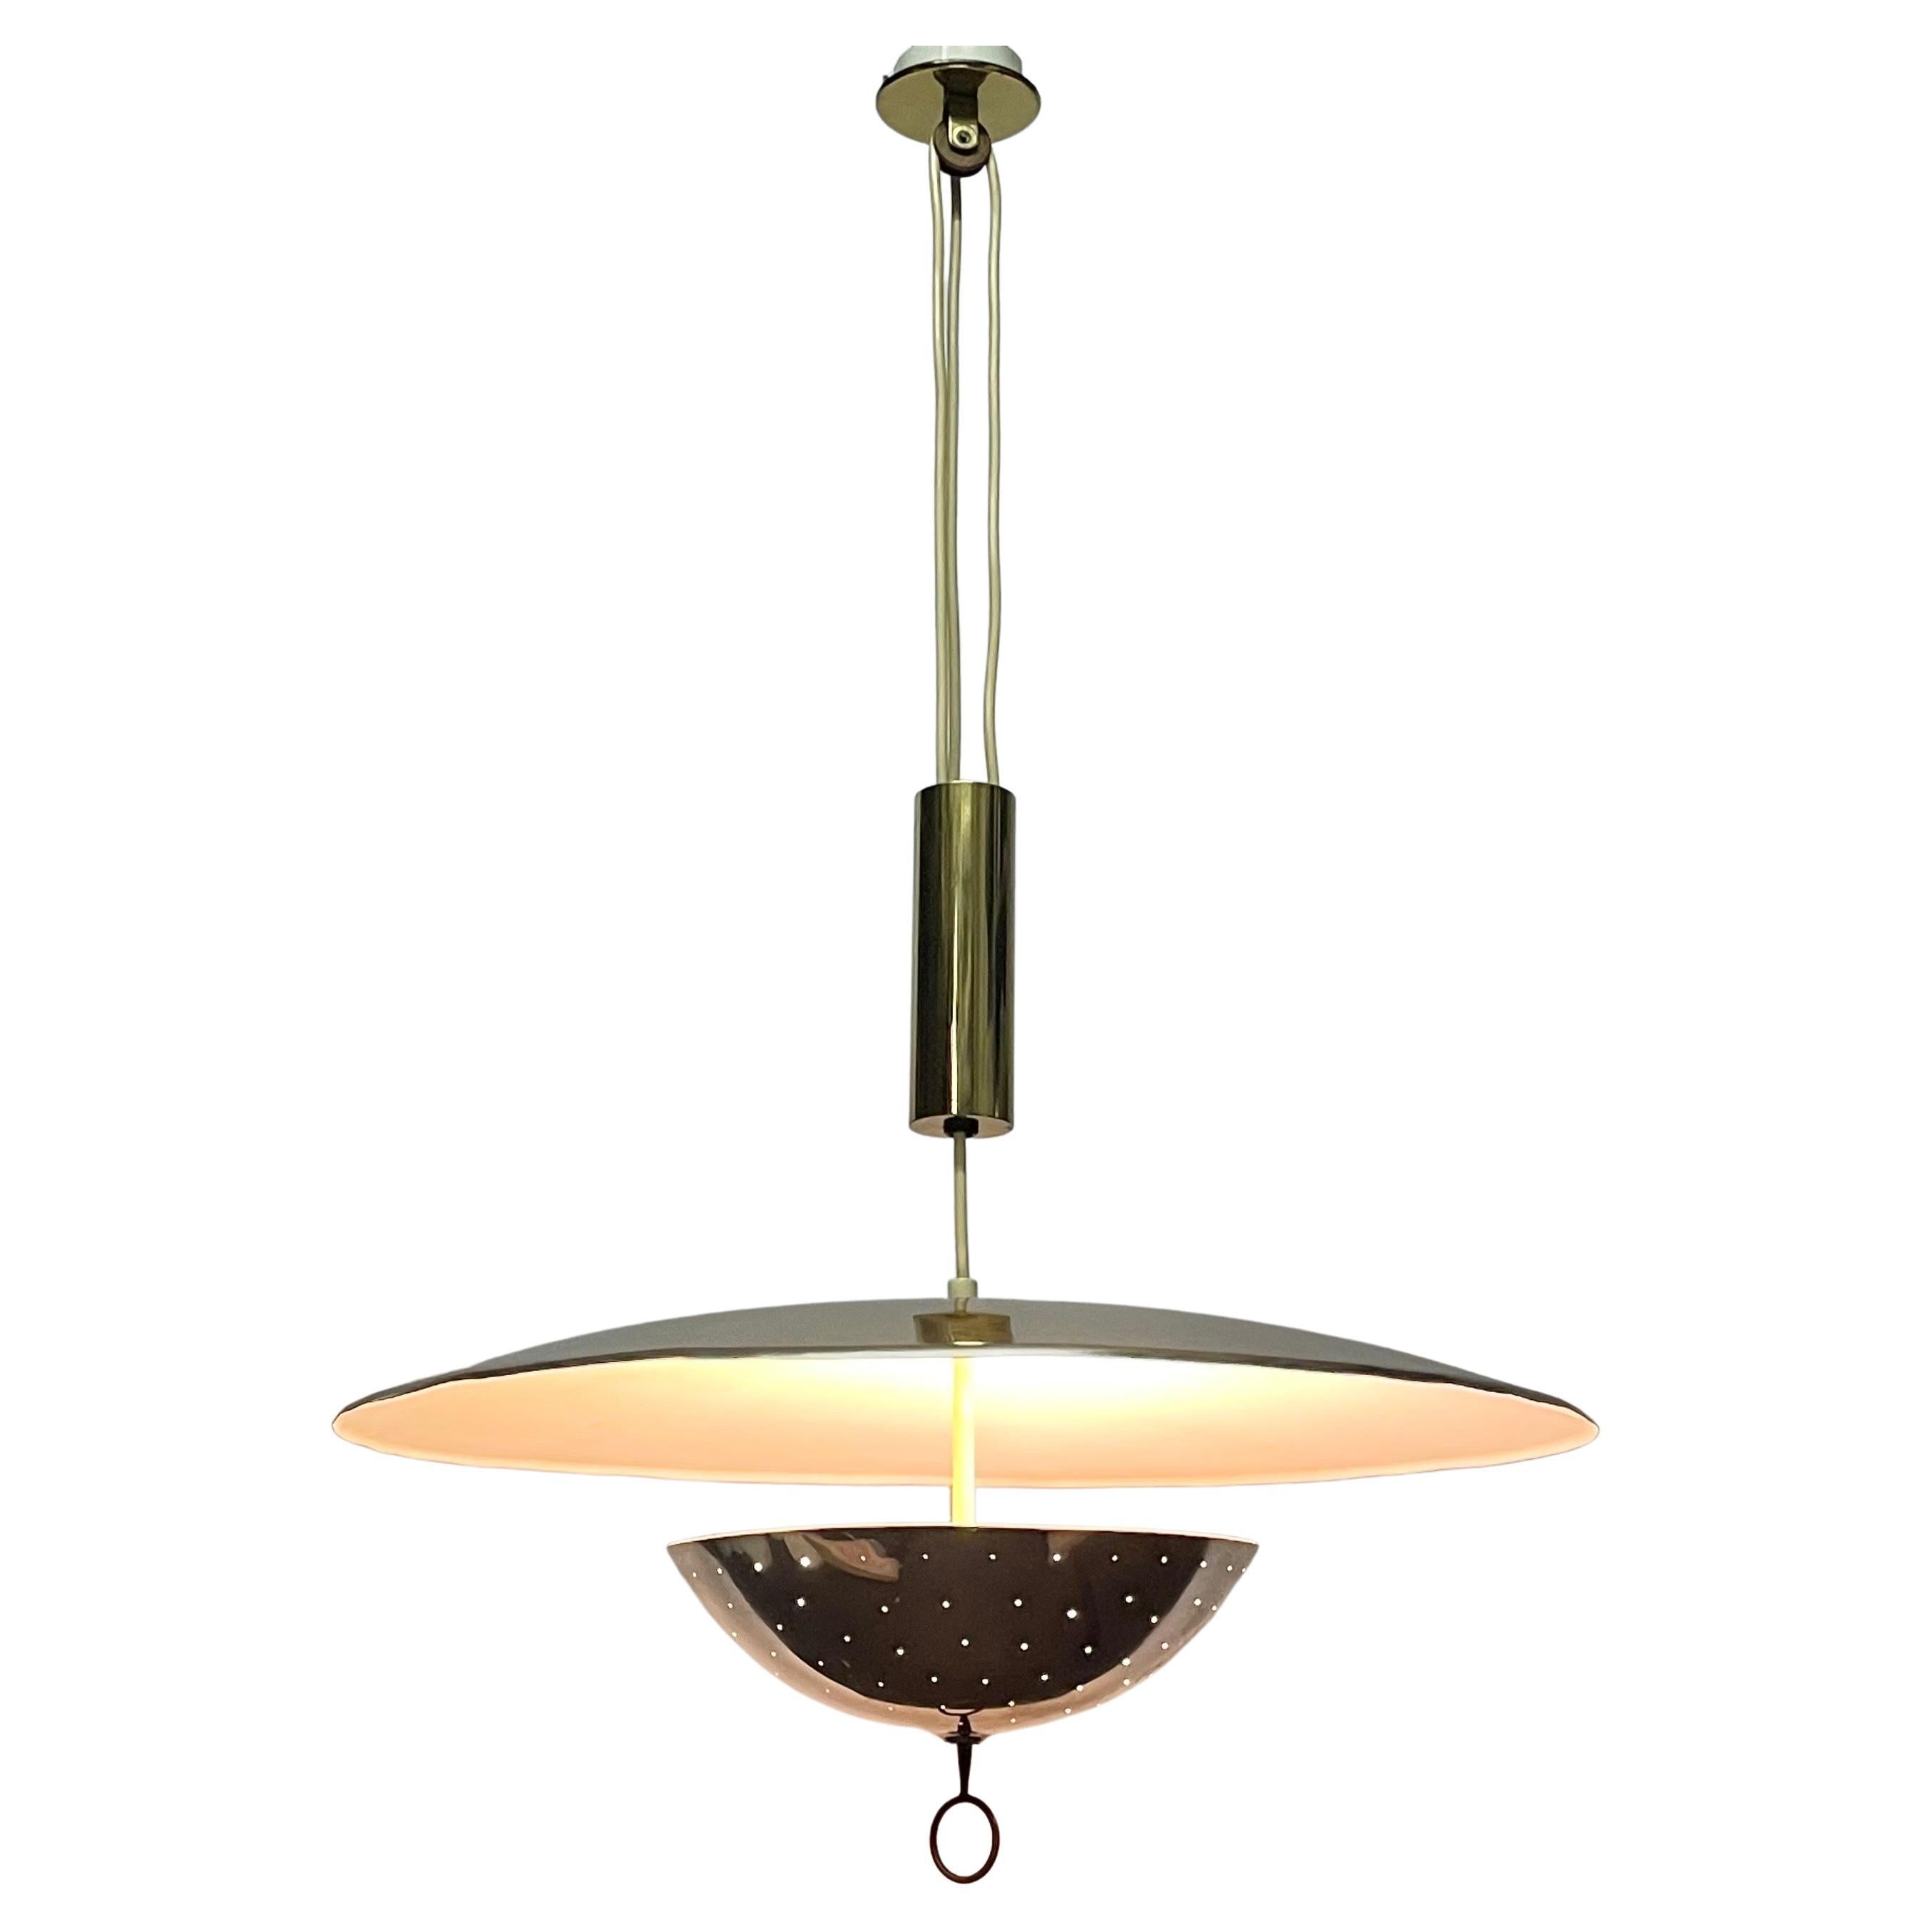 Very Rare Suspension Lamp by Gino Sarfatti for Arteluce, Italy, circa 1950s  For Sale at 1stDibs